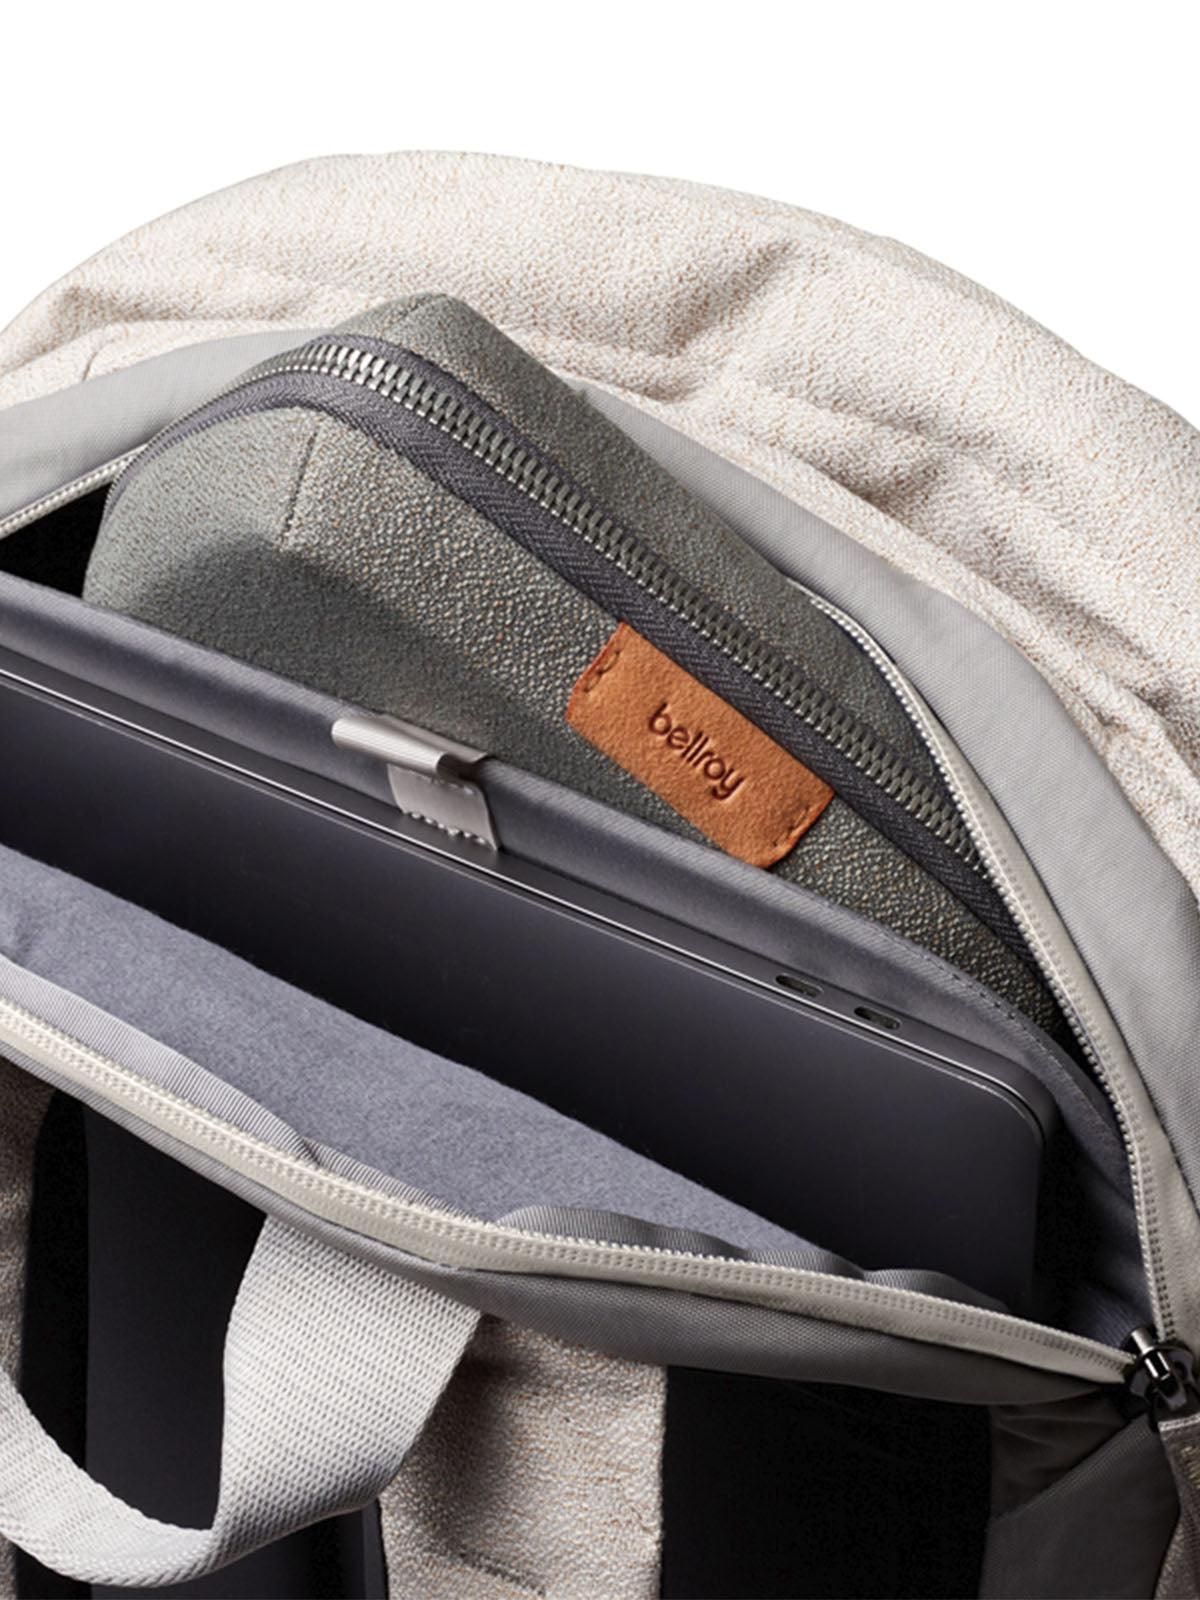 Bellroy Classic Backpack Plus Second Edition Saltbush